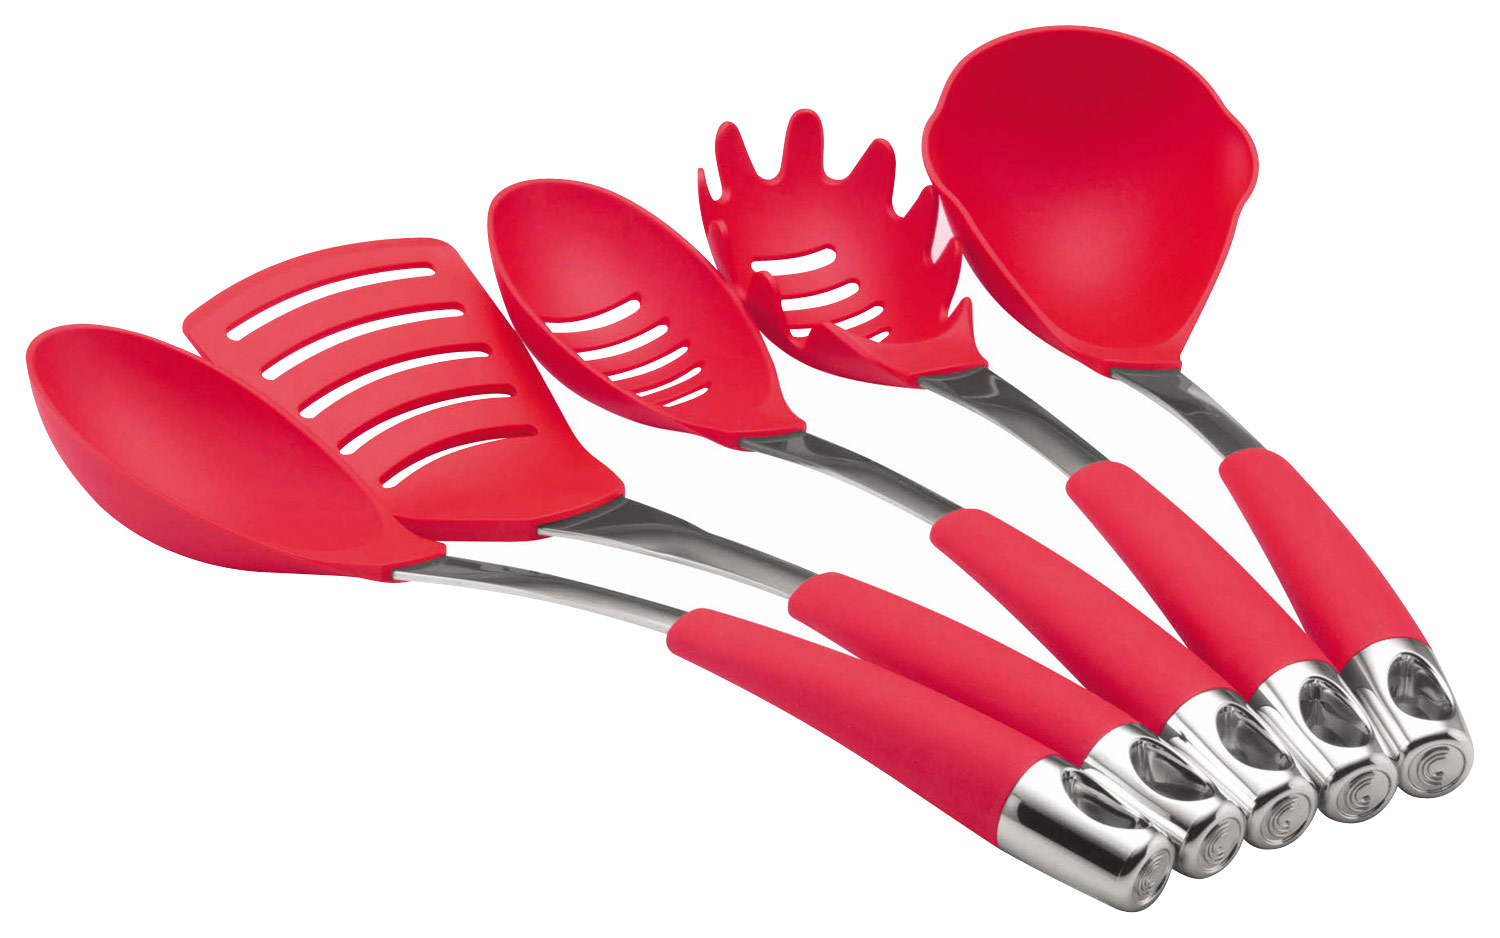 5pc Quality Plastic Kitchen Tool Cooking Utensil Set Slotted Spatula Spoon Ladle